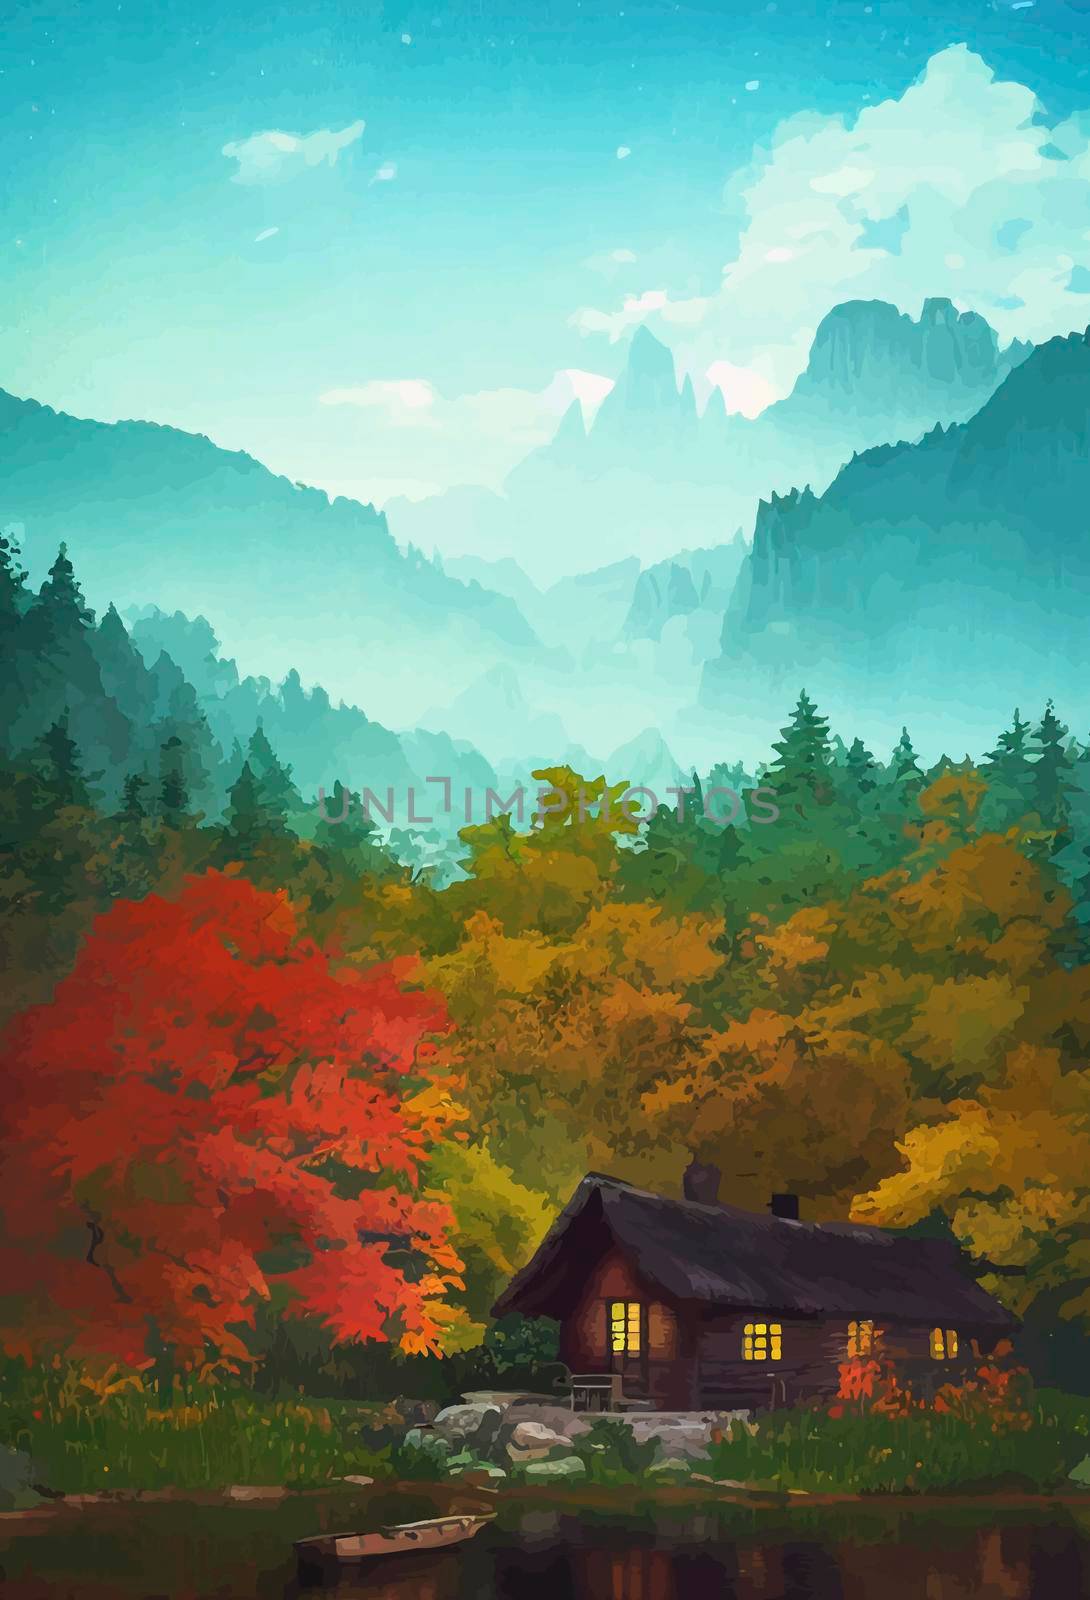 cabin in the woods by the lake, forest in autumn.